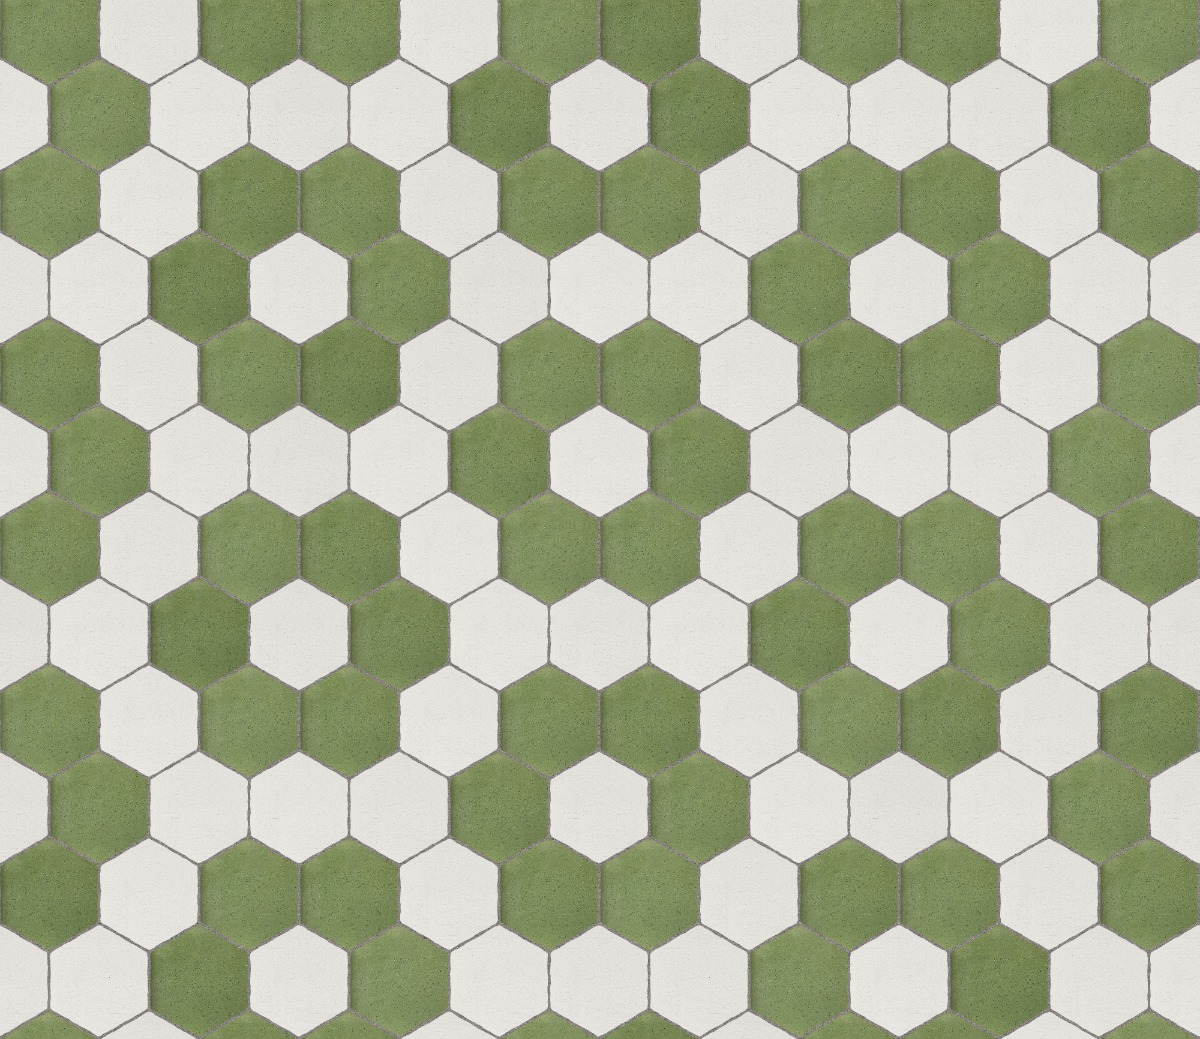 A seamless tile texture with crazing tile tiles arranged in a Hexagonal pattern